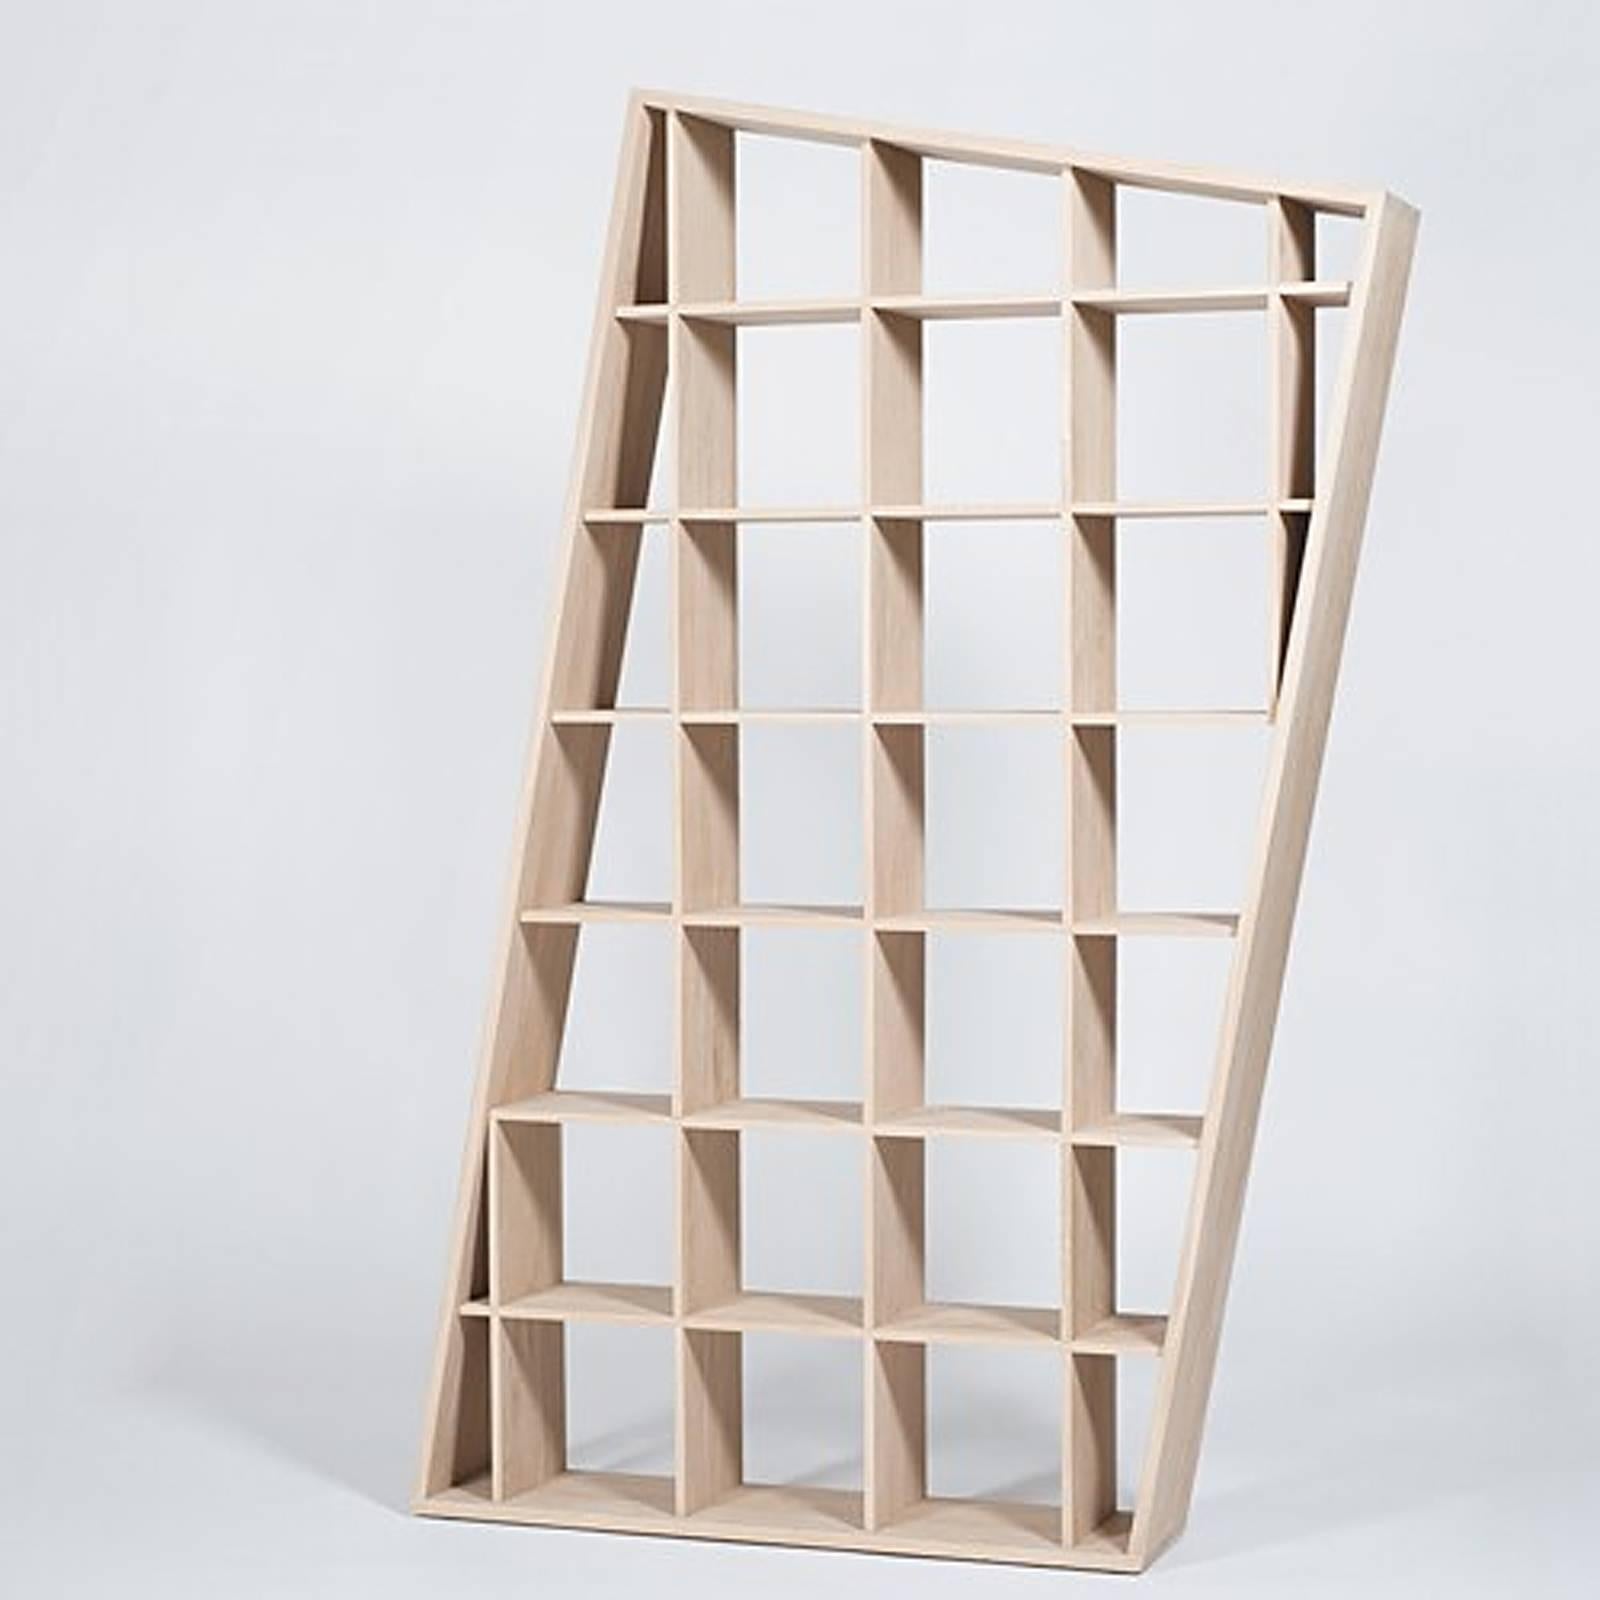 Shelve aspect 100% solid French oak from sustainable
forests in France. Designed and made in Anjou (Loire valley).
Each case: 33 x 33cm.
Ordinary lines: horizontal, vertical or slanted , right angles or
large. Designed with harmony and balance.
